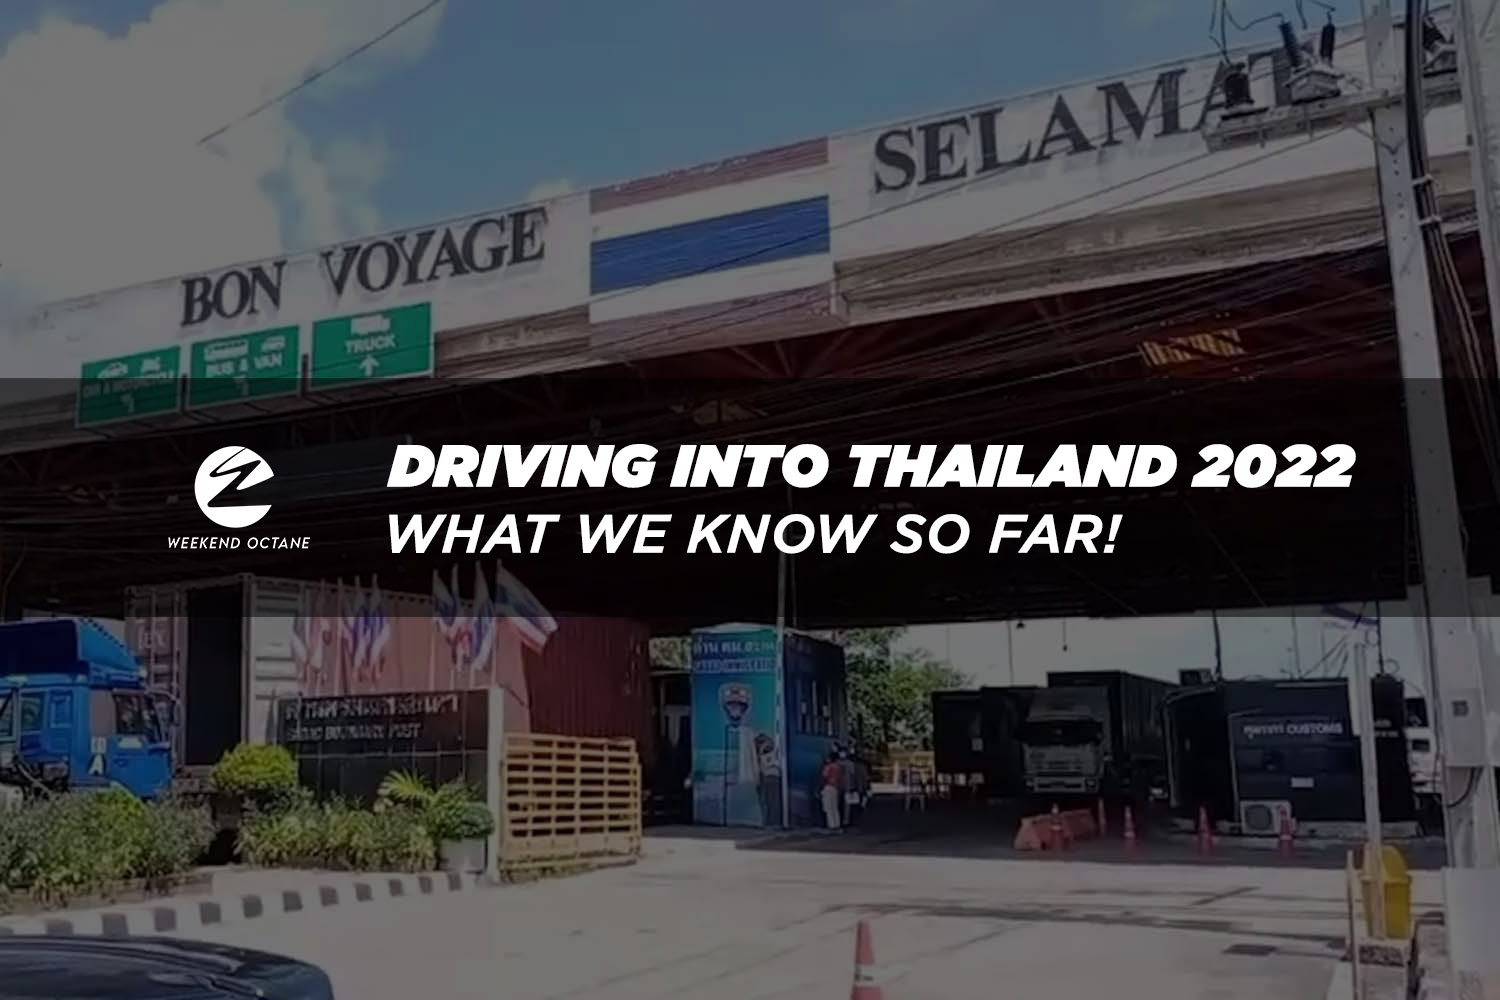 Can We Drive Into Thailand On 1st March 2022?